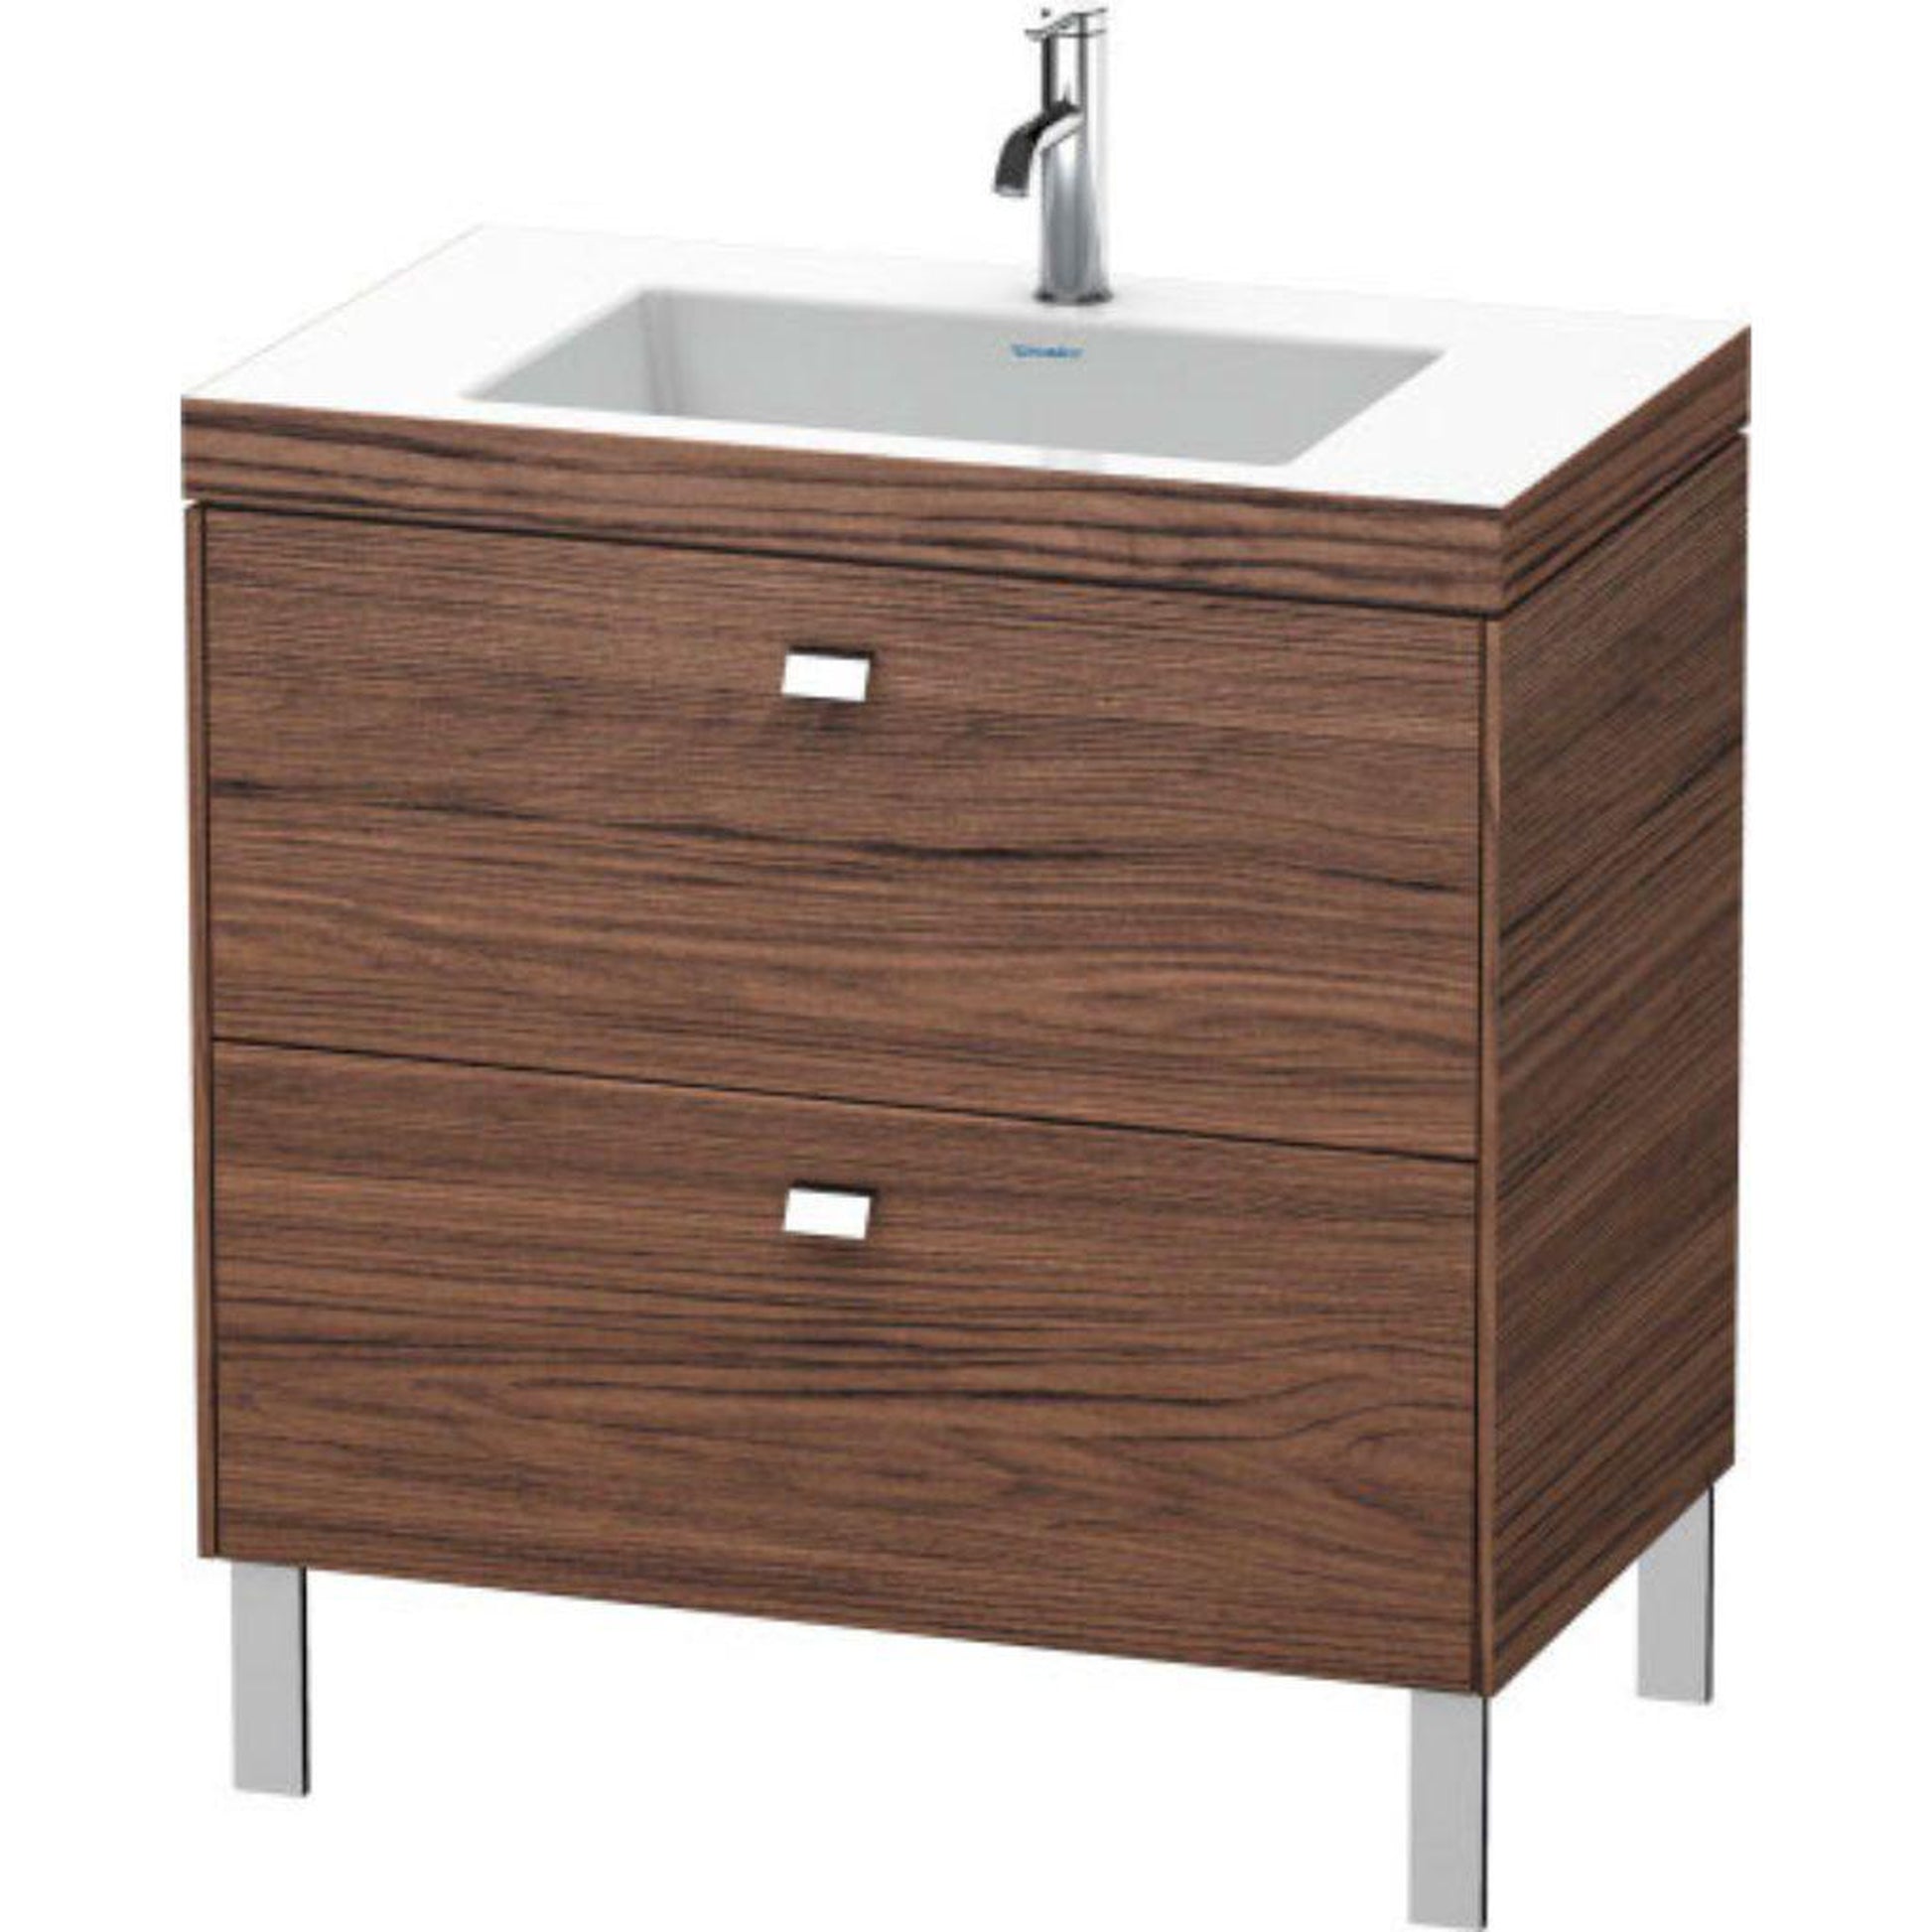 Duravit Brioso 31" x 28" x 19" Two Drawer C-Bonded Floor Standing Vanity Kit With One Tap Hole in Walnut Dark and Chrome Handle